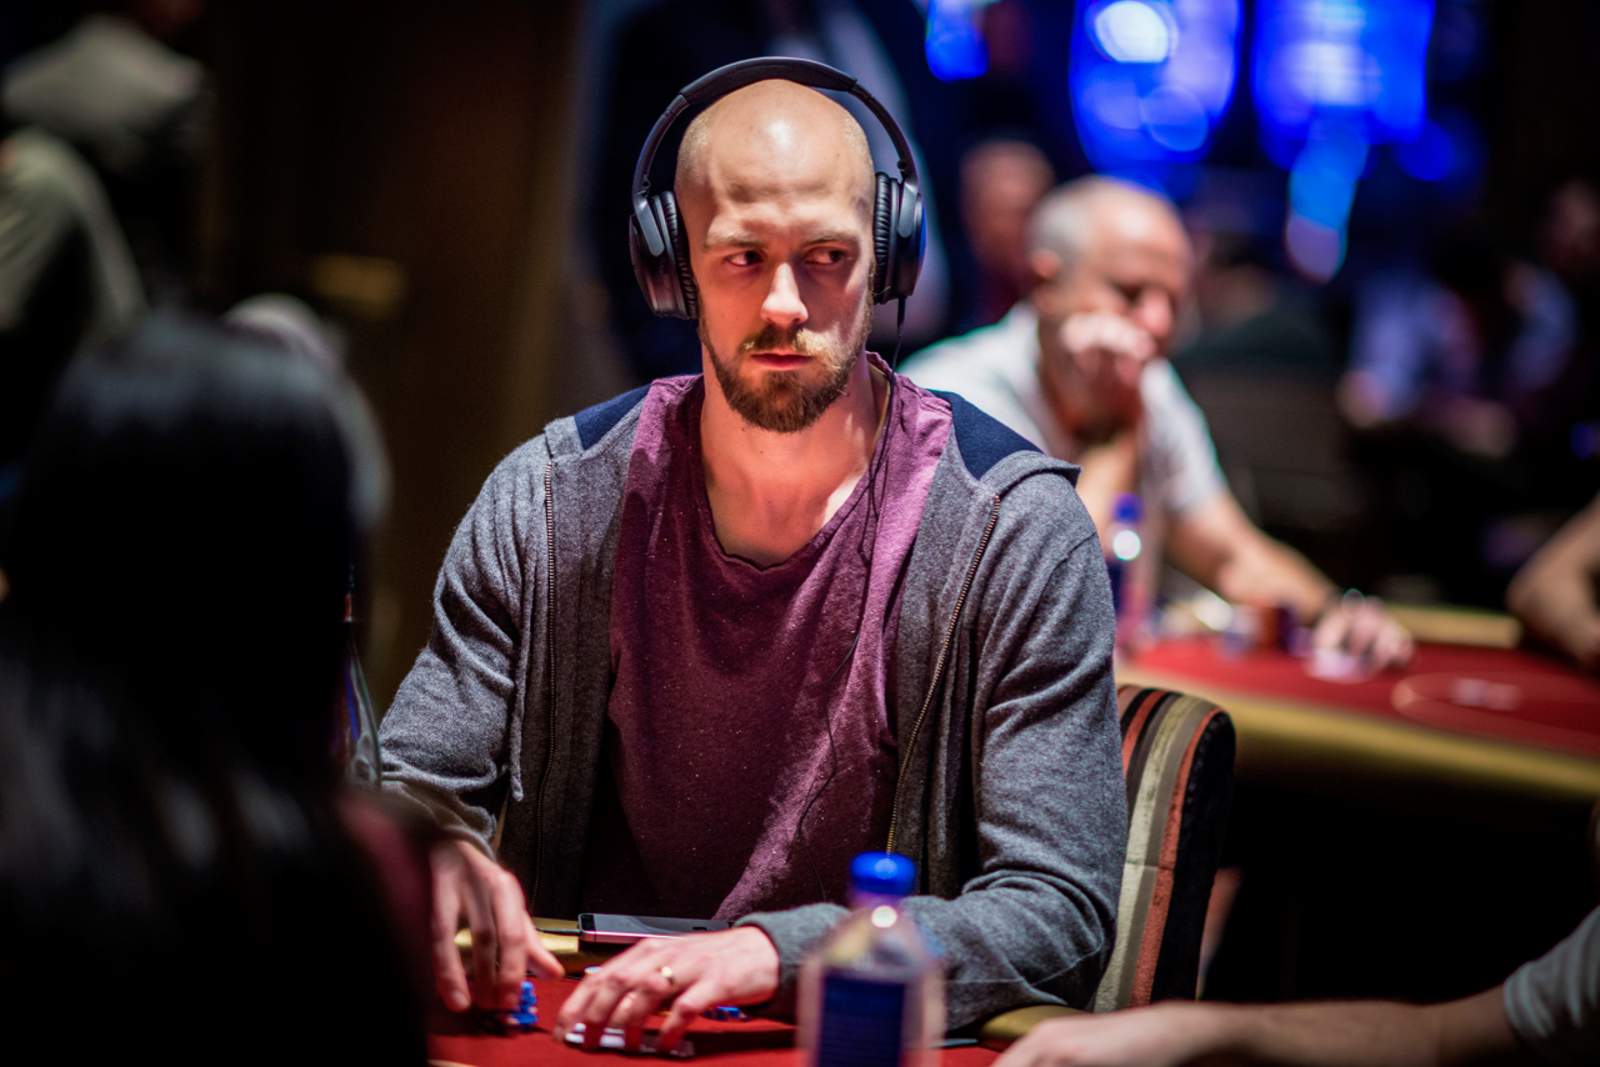 Chidwick Controls $25K Chip Lead, Contending For Third Title